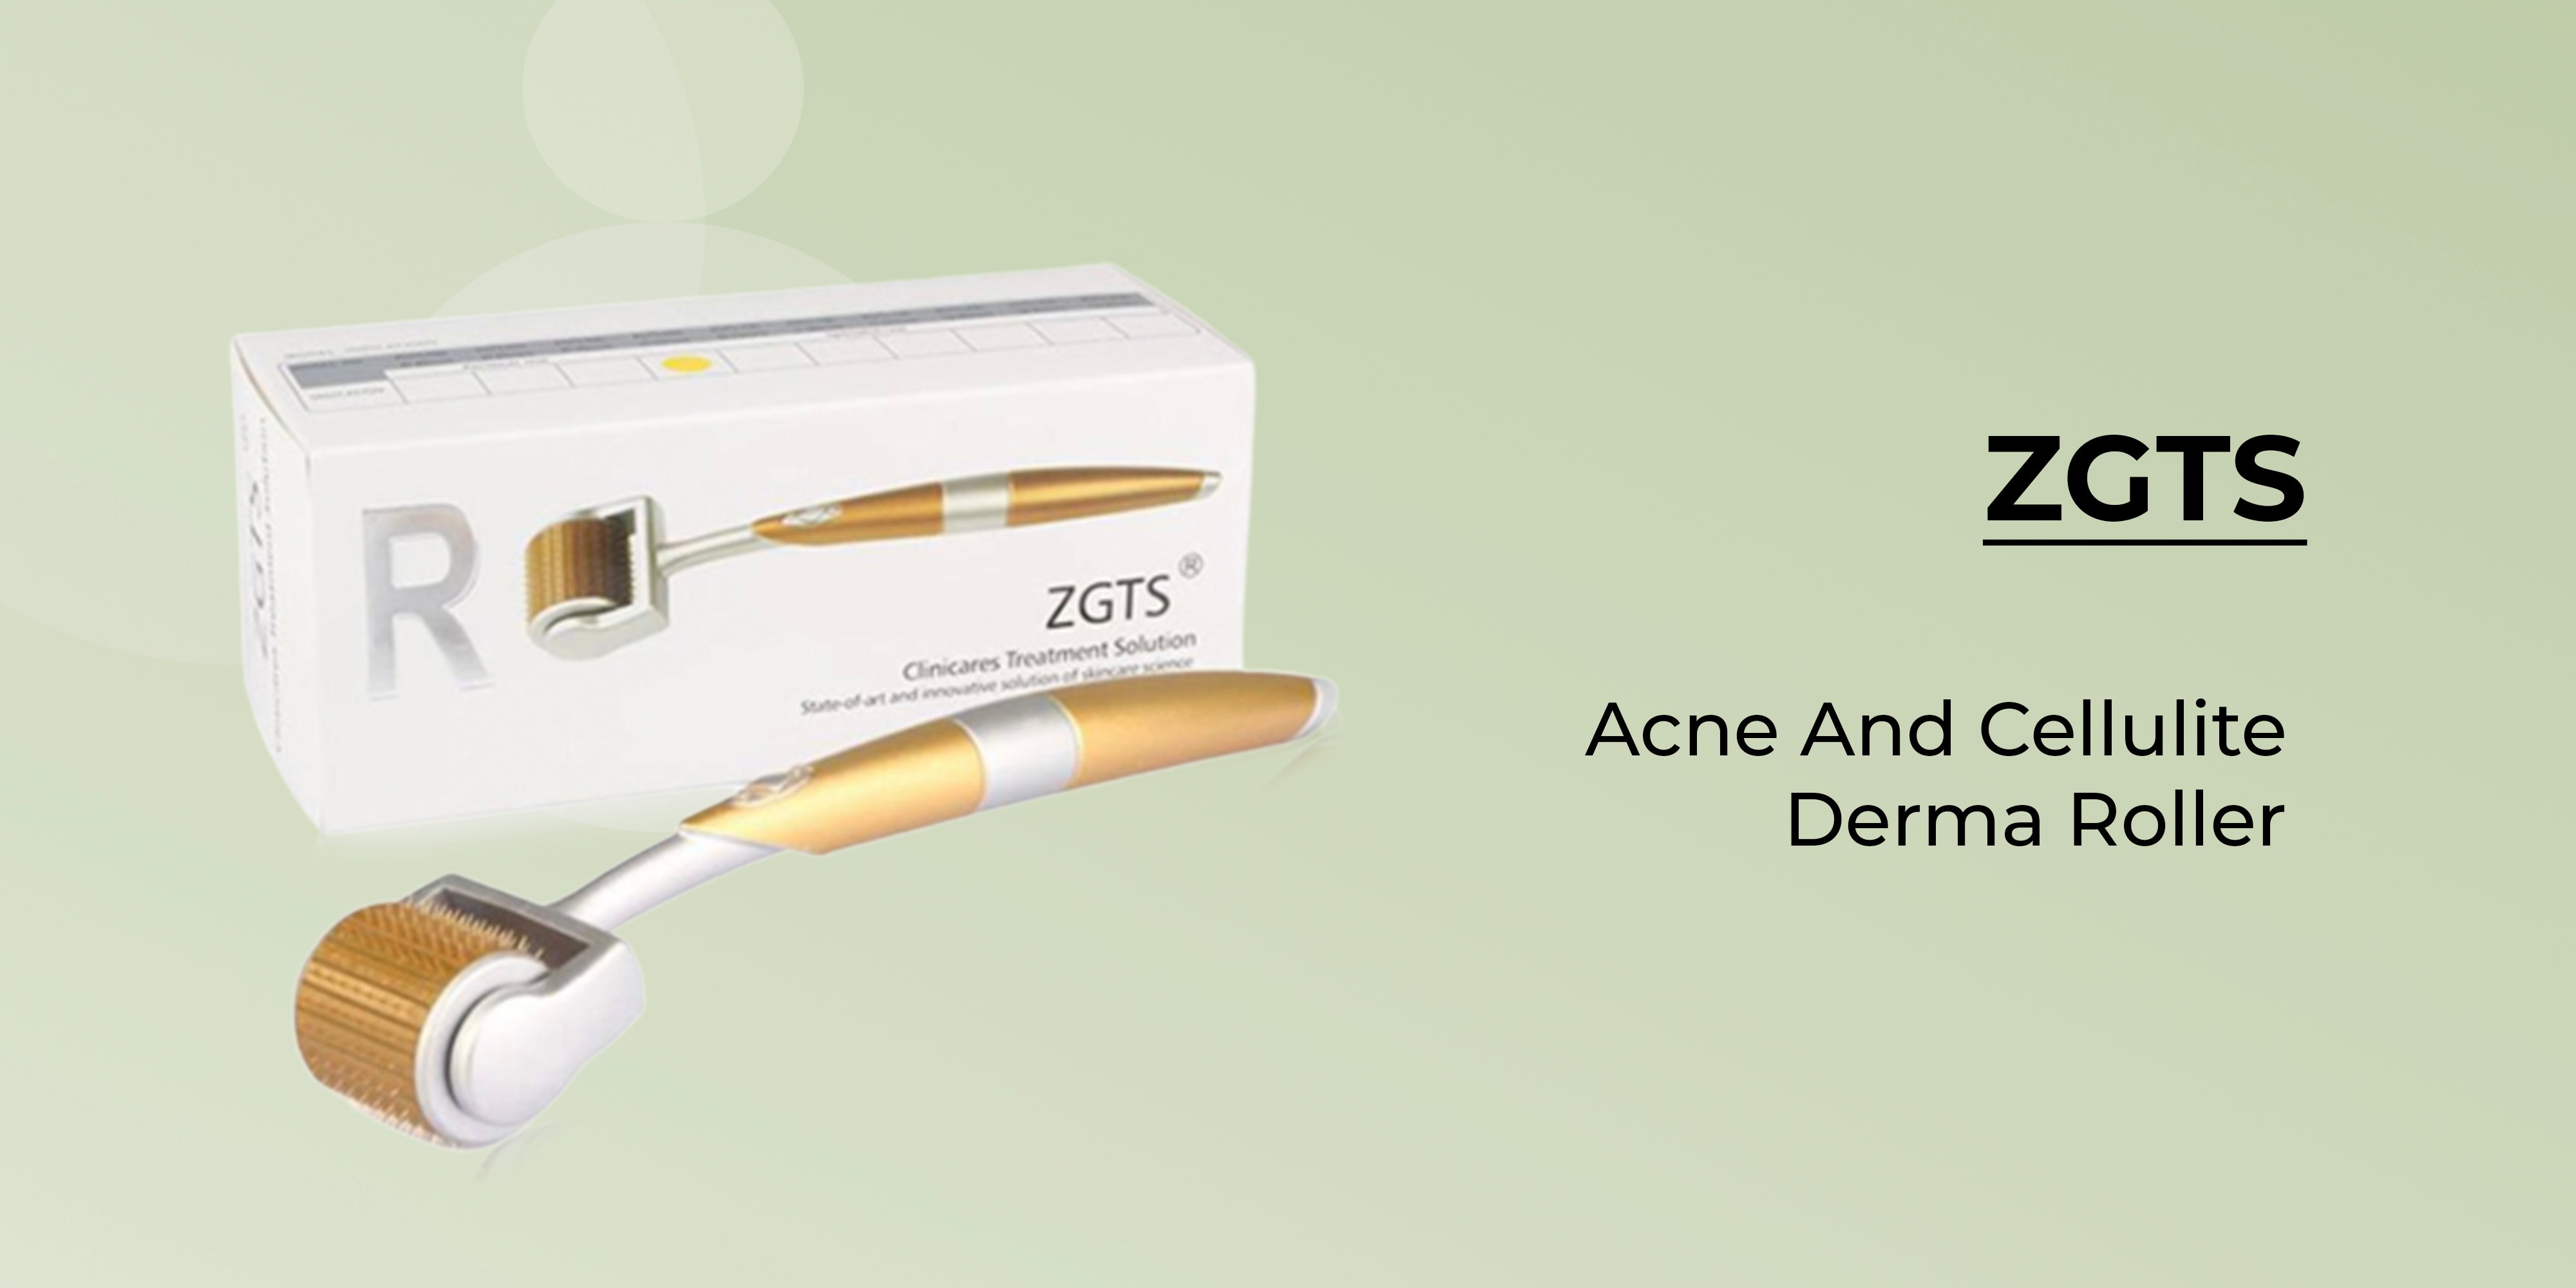 Shop ZGTS Acne And Cellulite Derma Roller Gold/White online in Dubai, Abu  Dhabi and all UAE